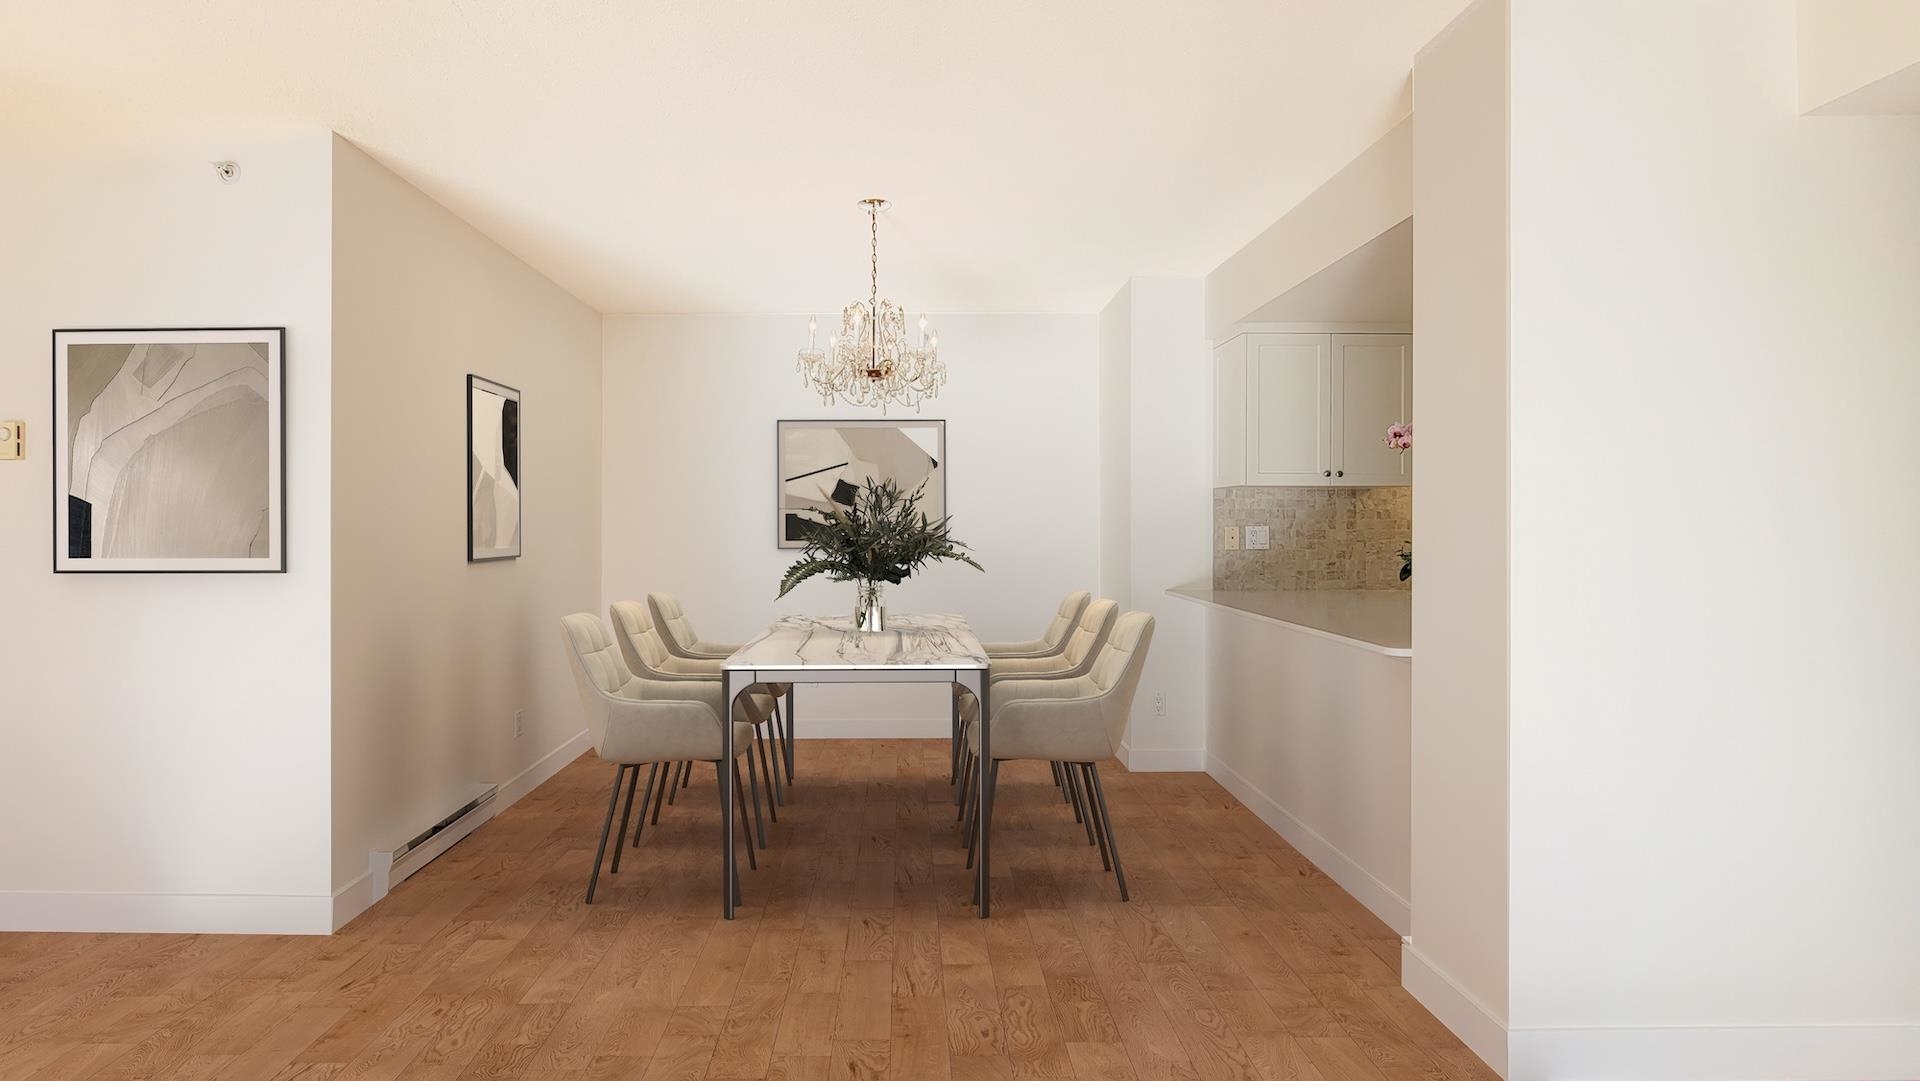 Here is a virtually staged photo to help you envision this space with a dining table.